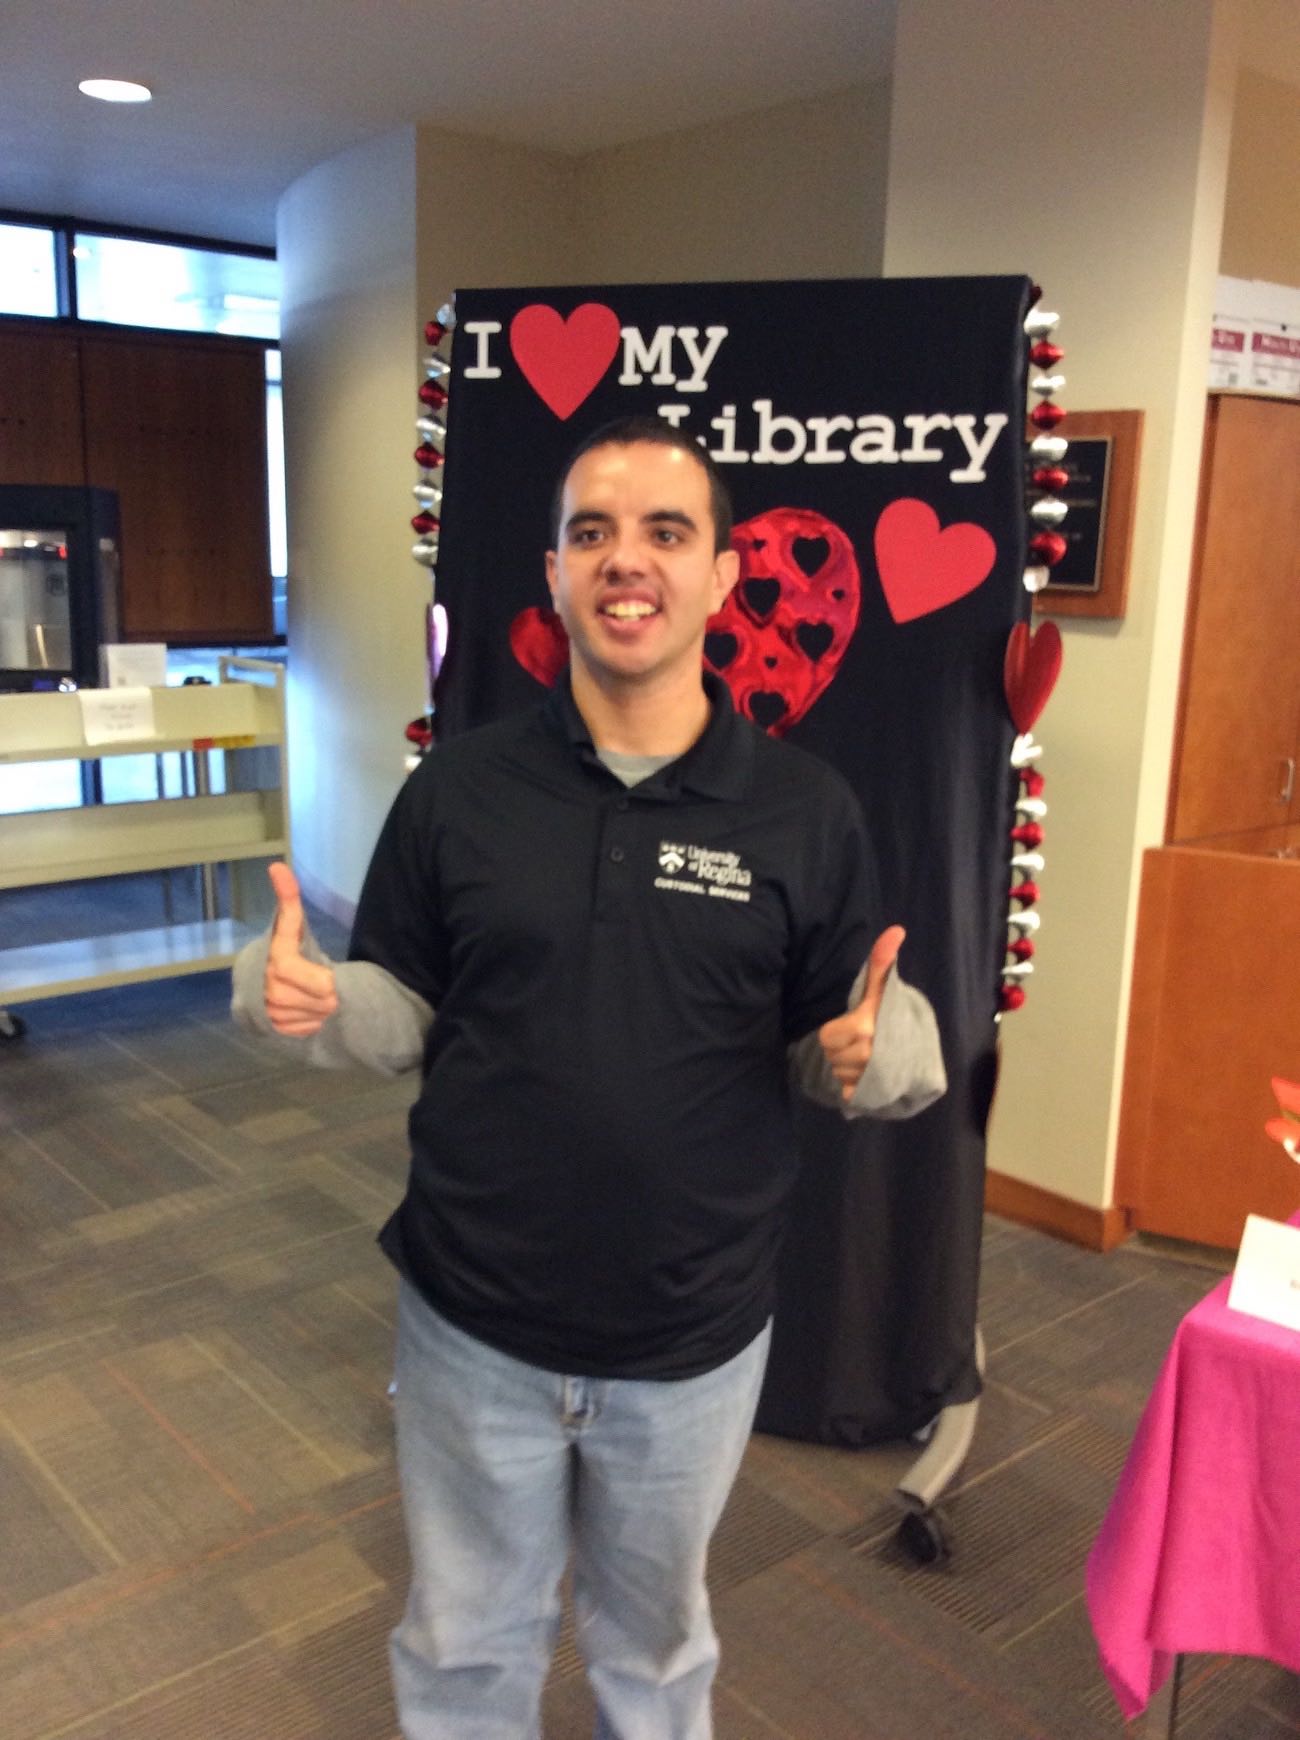 One of the library's Facilities Management staff stands in front of the I love my Library backdrop smiling and giving two thumbs up